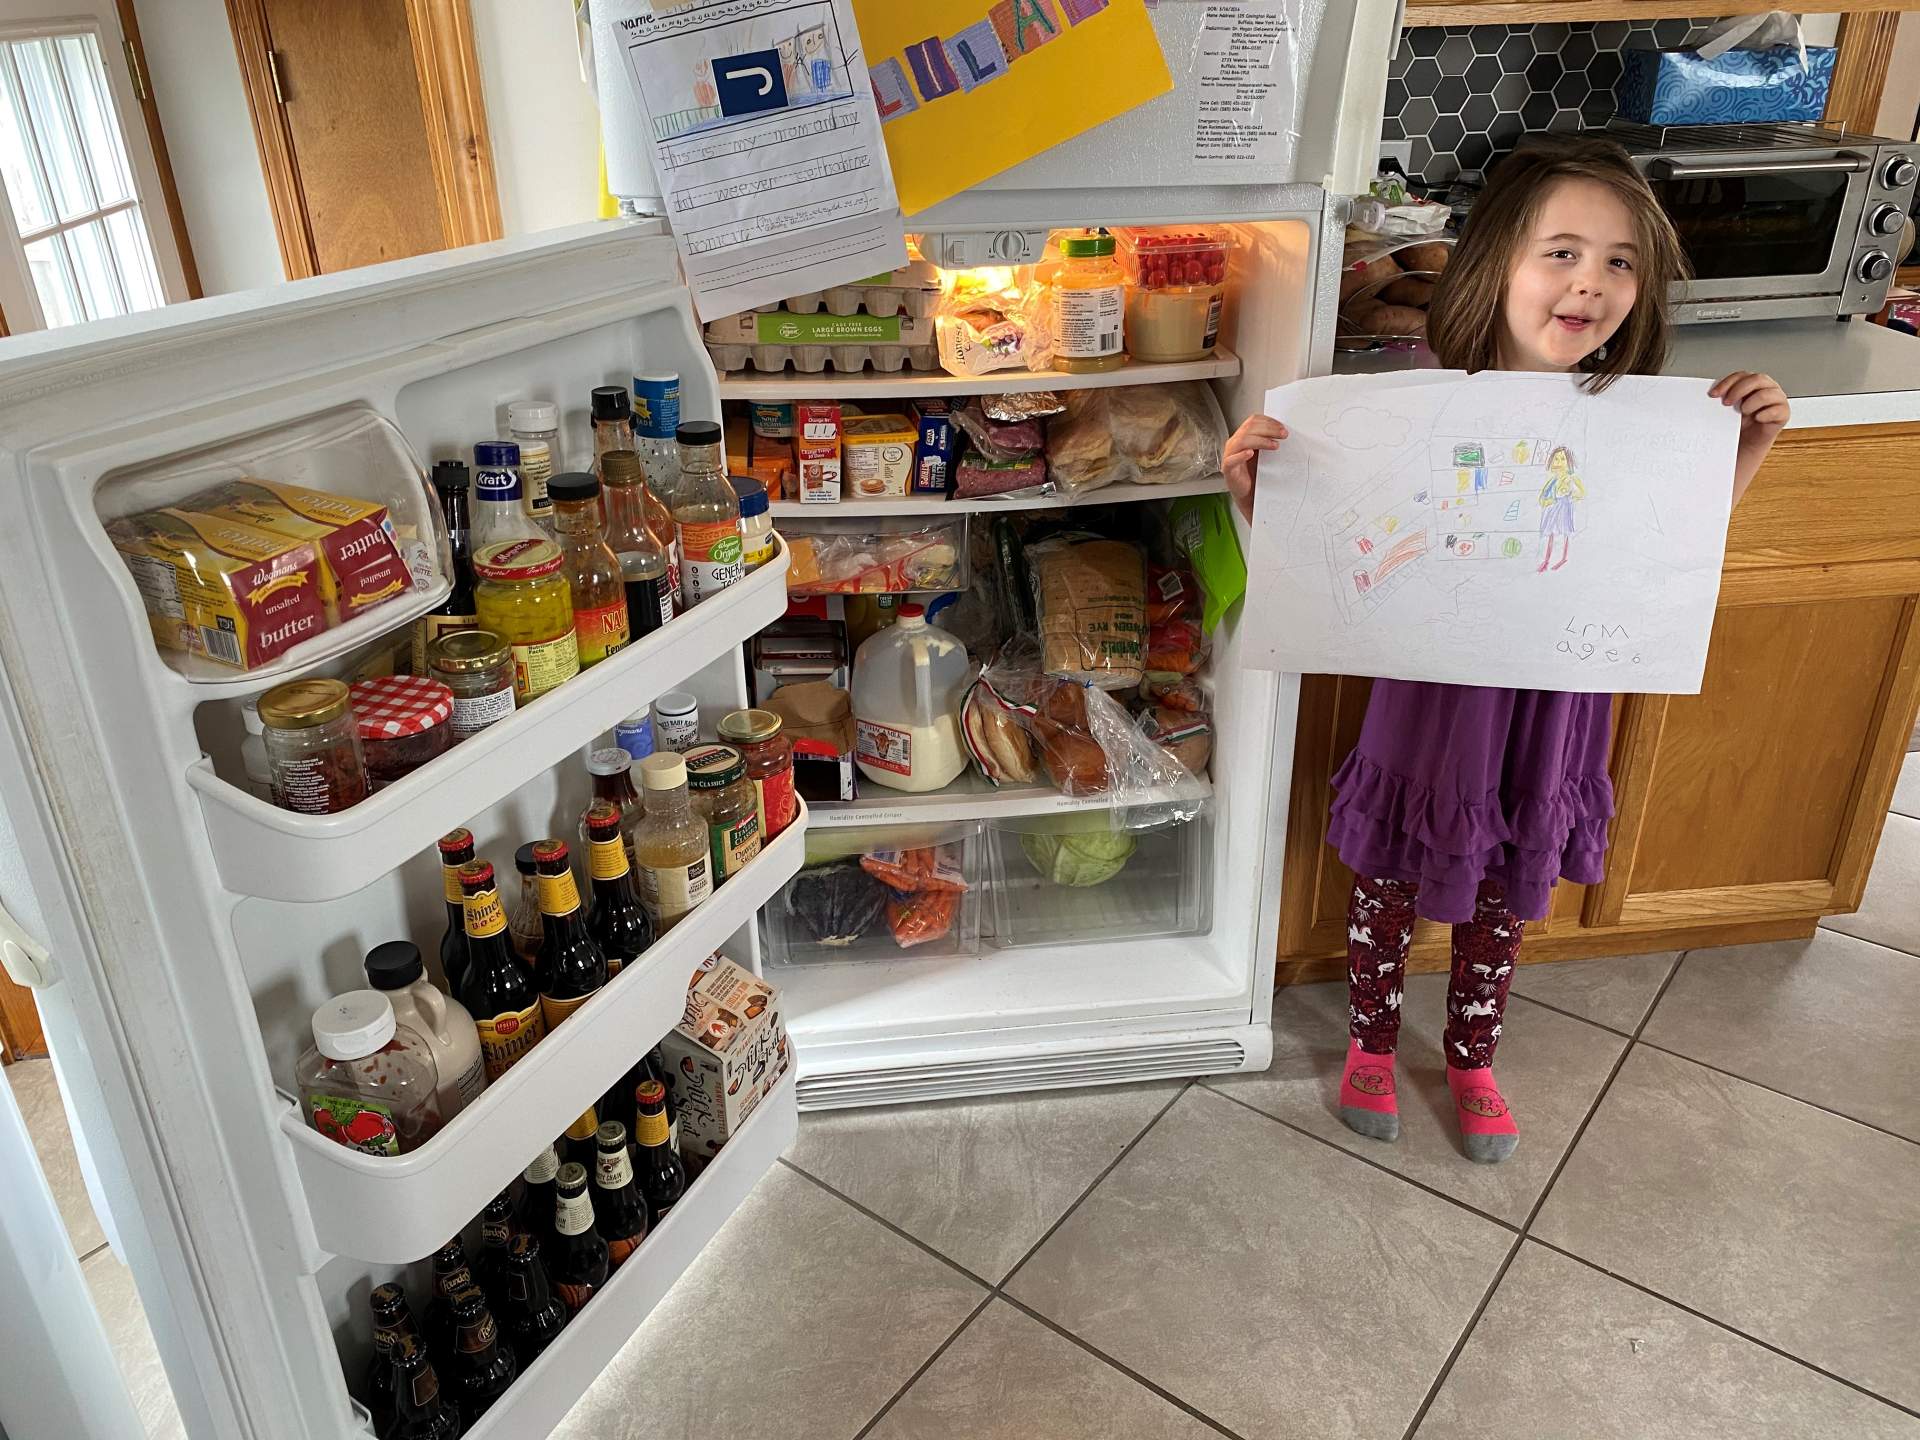 What's in Your Fridge?